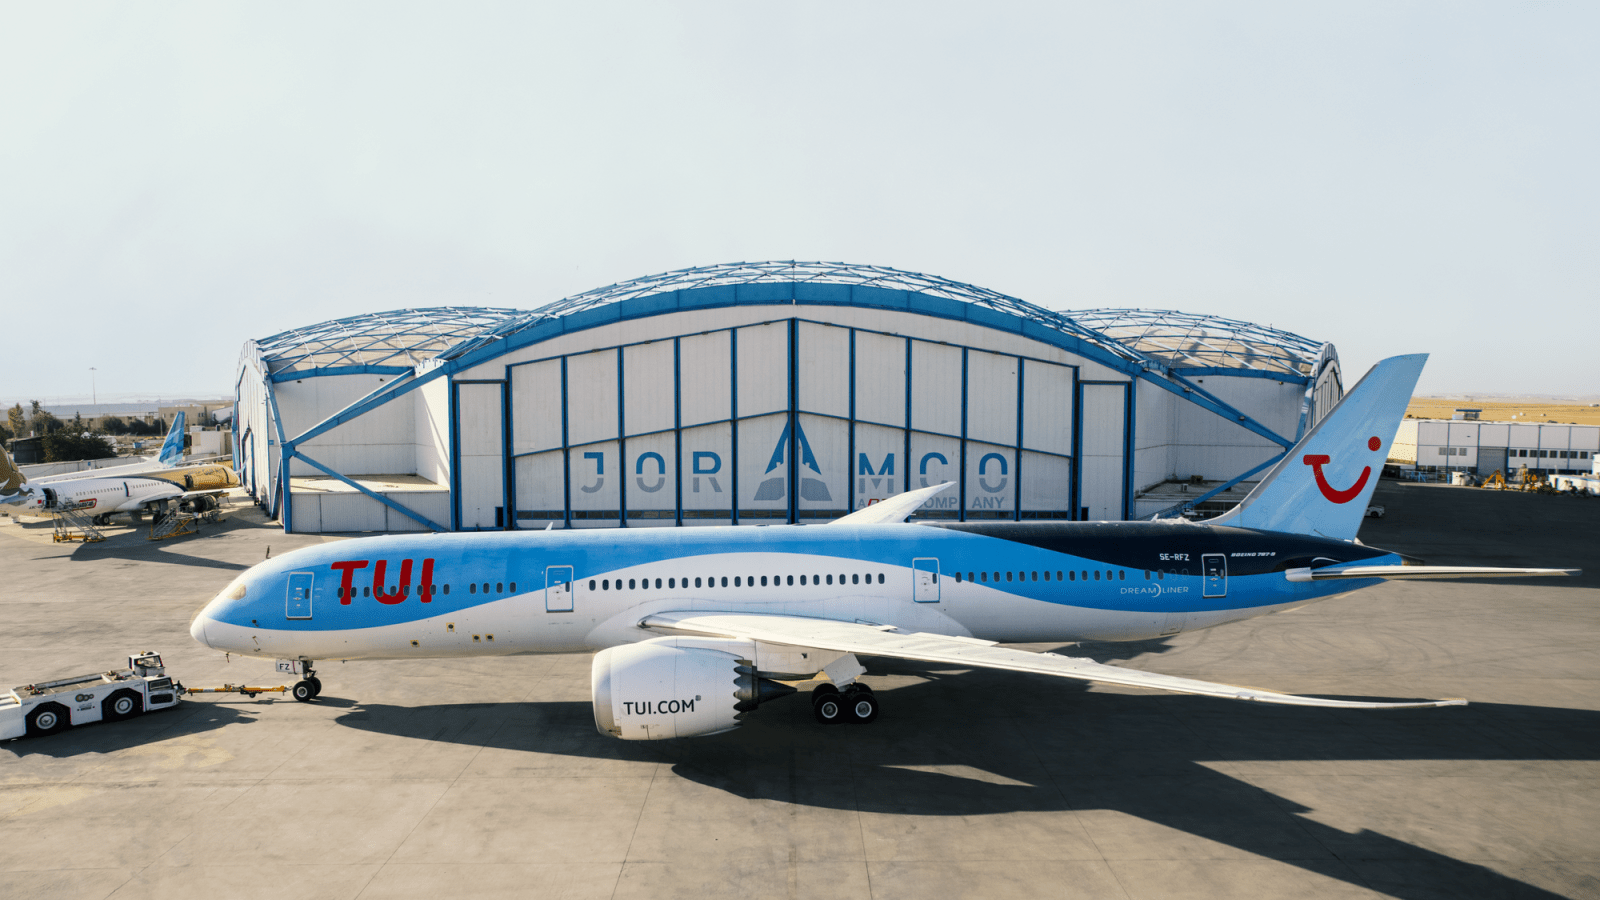 Joramco Signs Deal with TUI for Heavy Maintenance on Boeing 787s